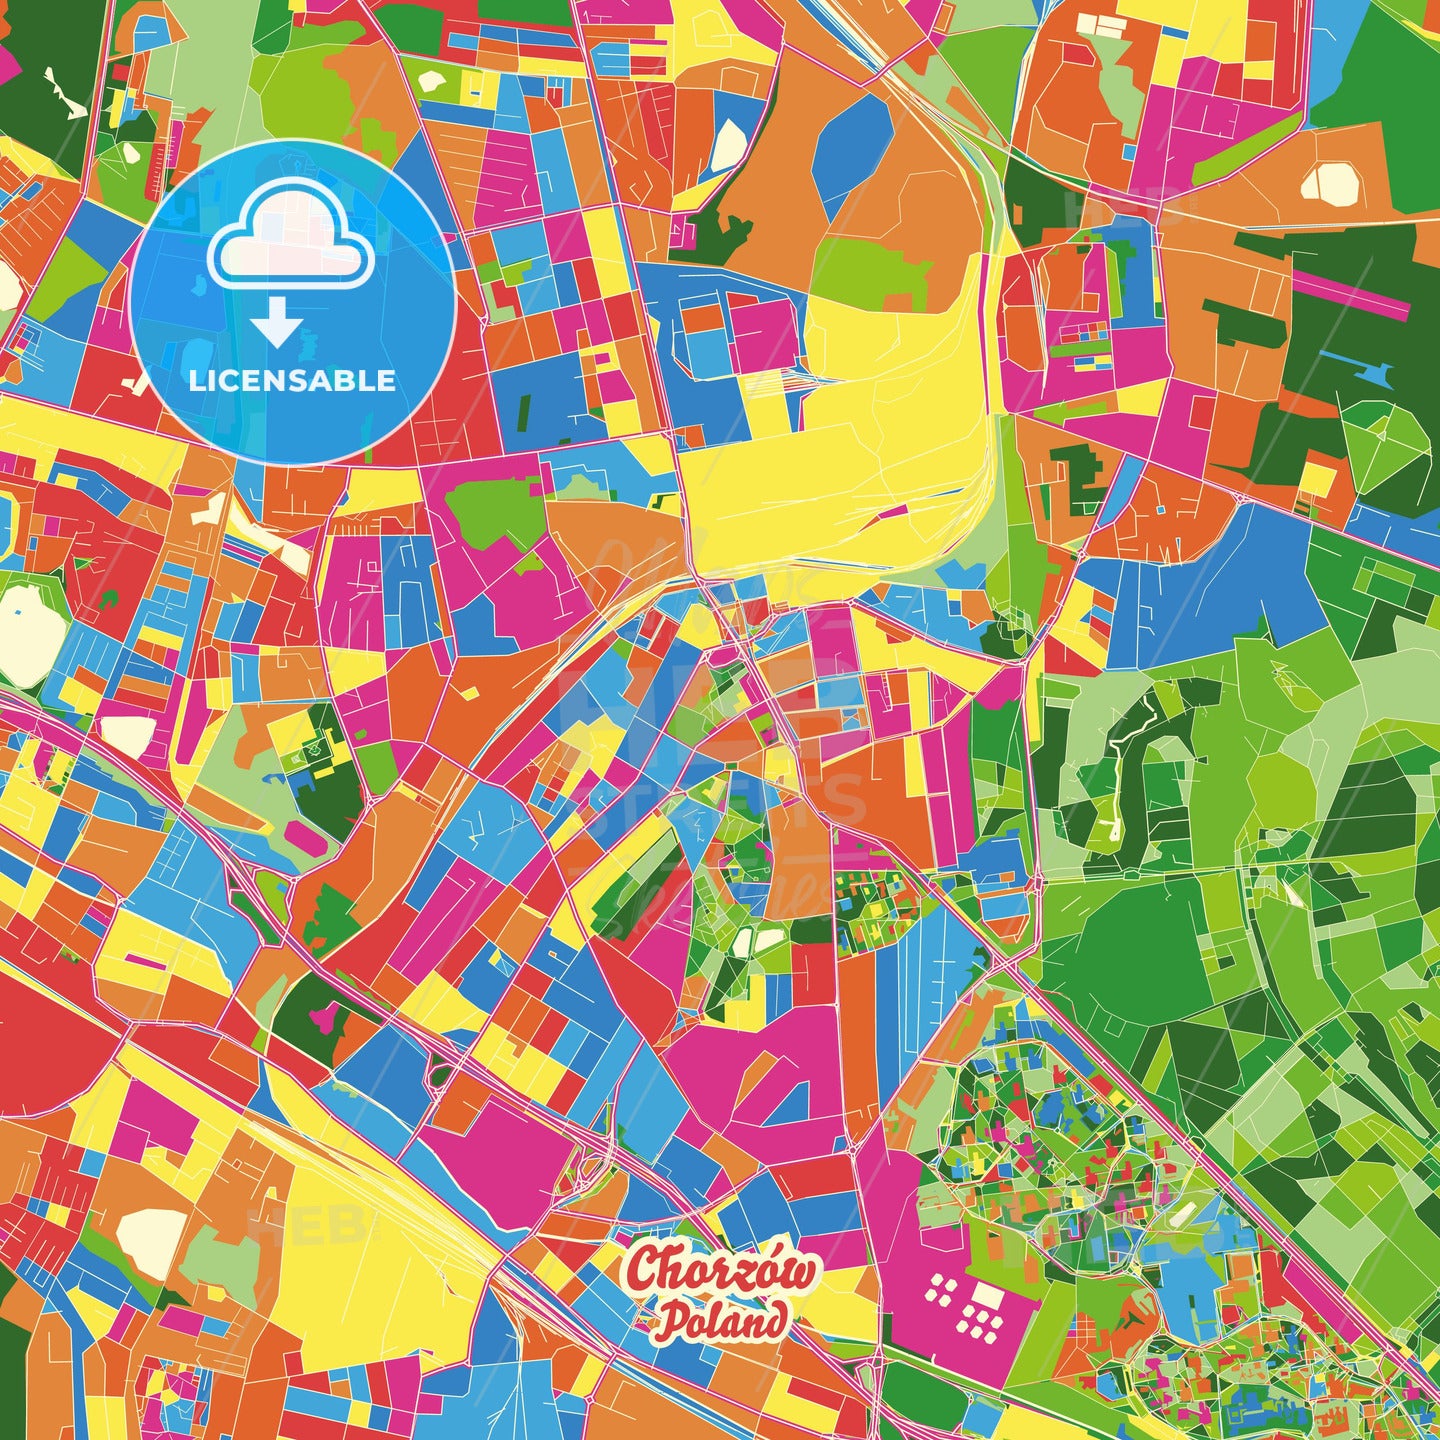 Chorzów, Poland Crazy Colorful Street Map Poster Template - HEBSTREITS Sketches